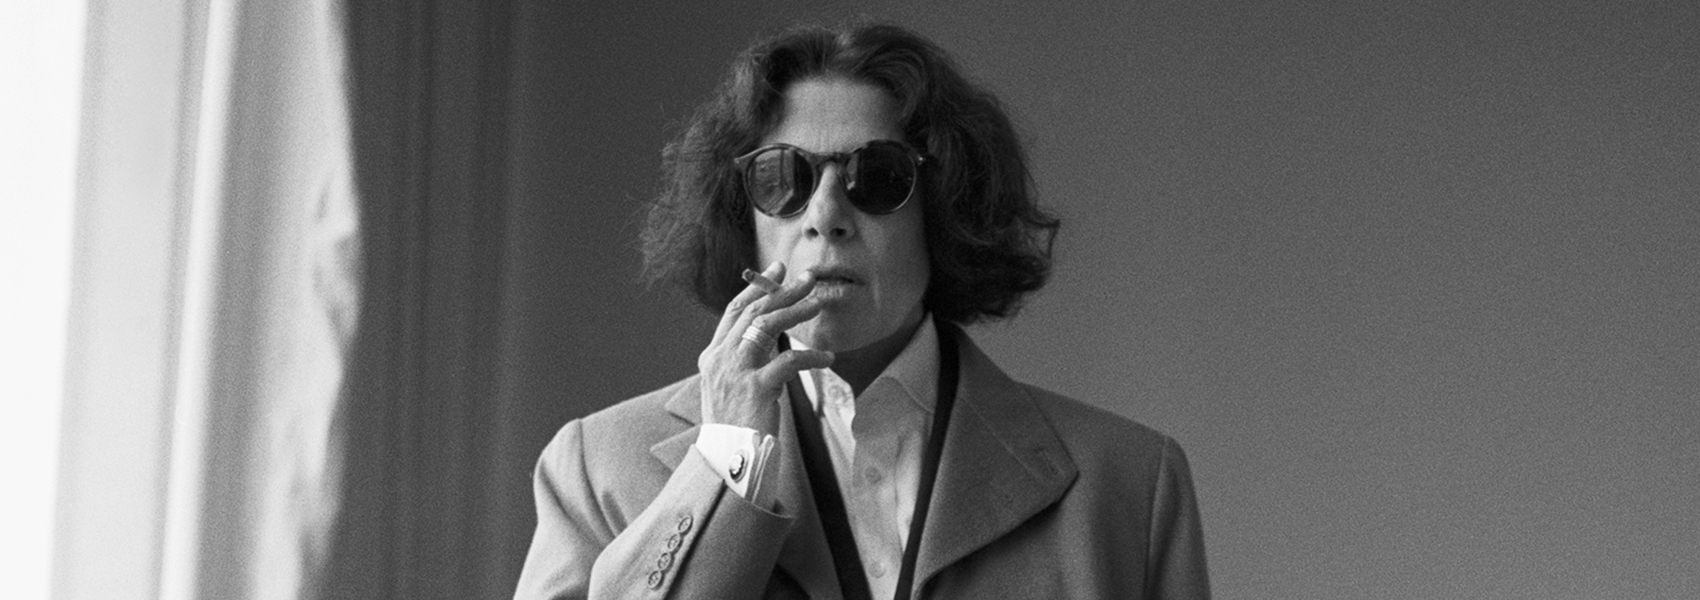 Fran Lebowitz is pictured with shoulder-length hair, sunglasses, and a suit jacket smoking a cigarette in a black and white photo.